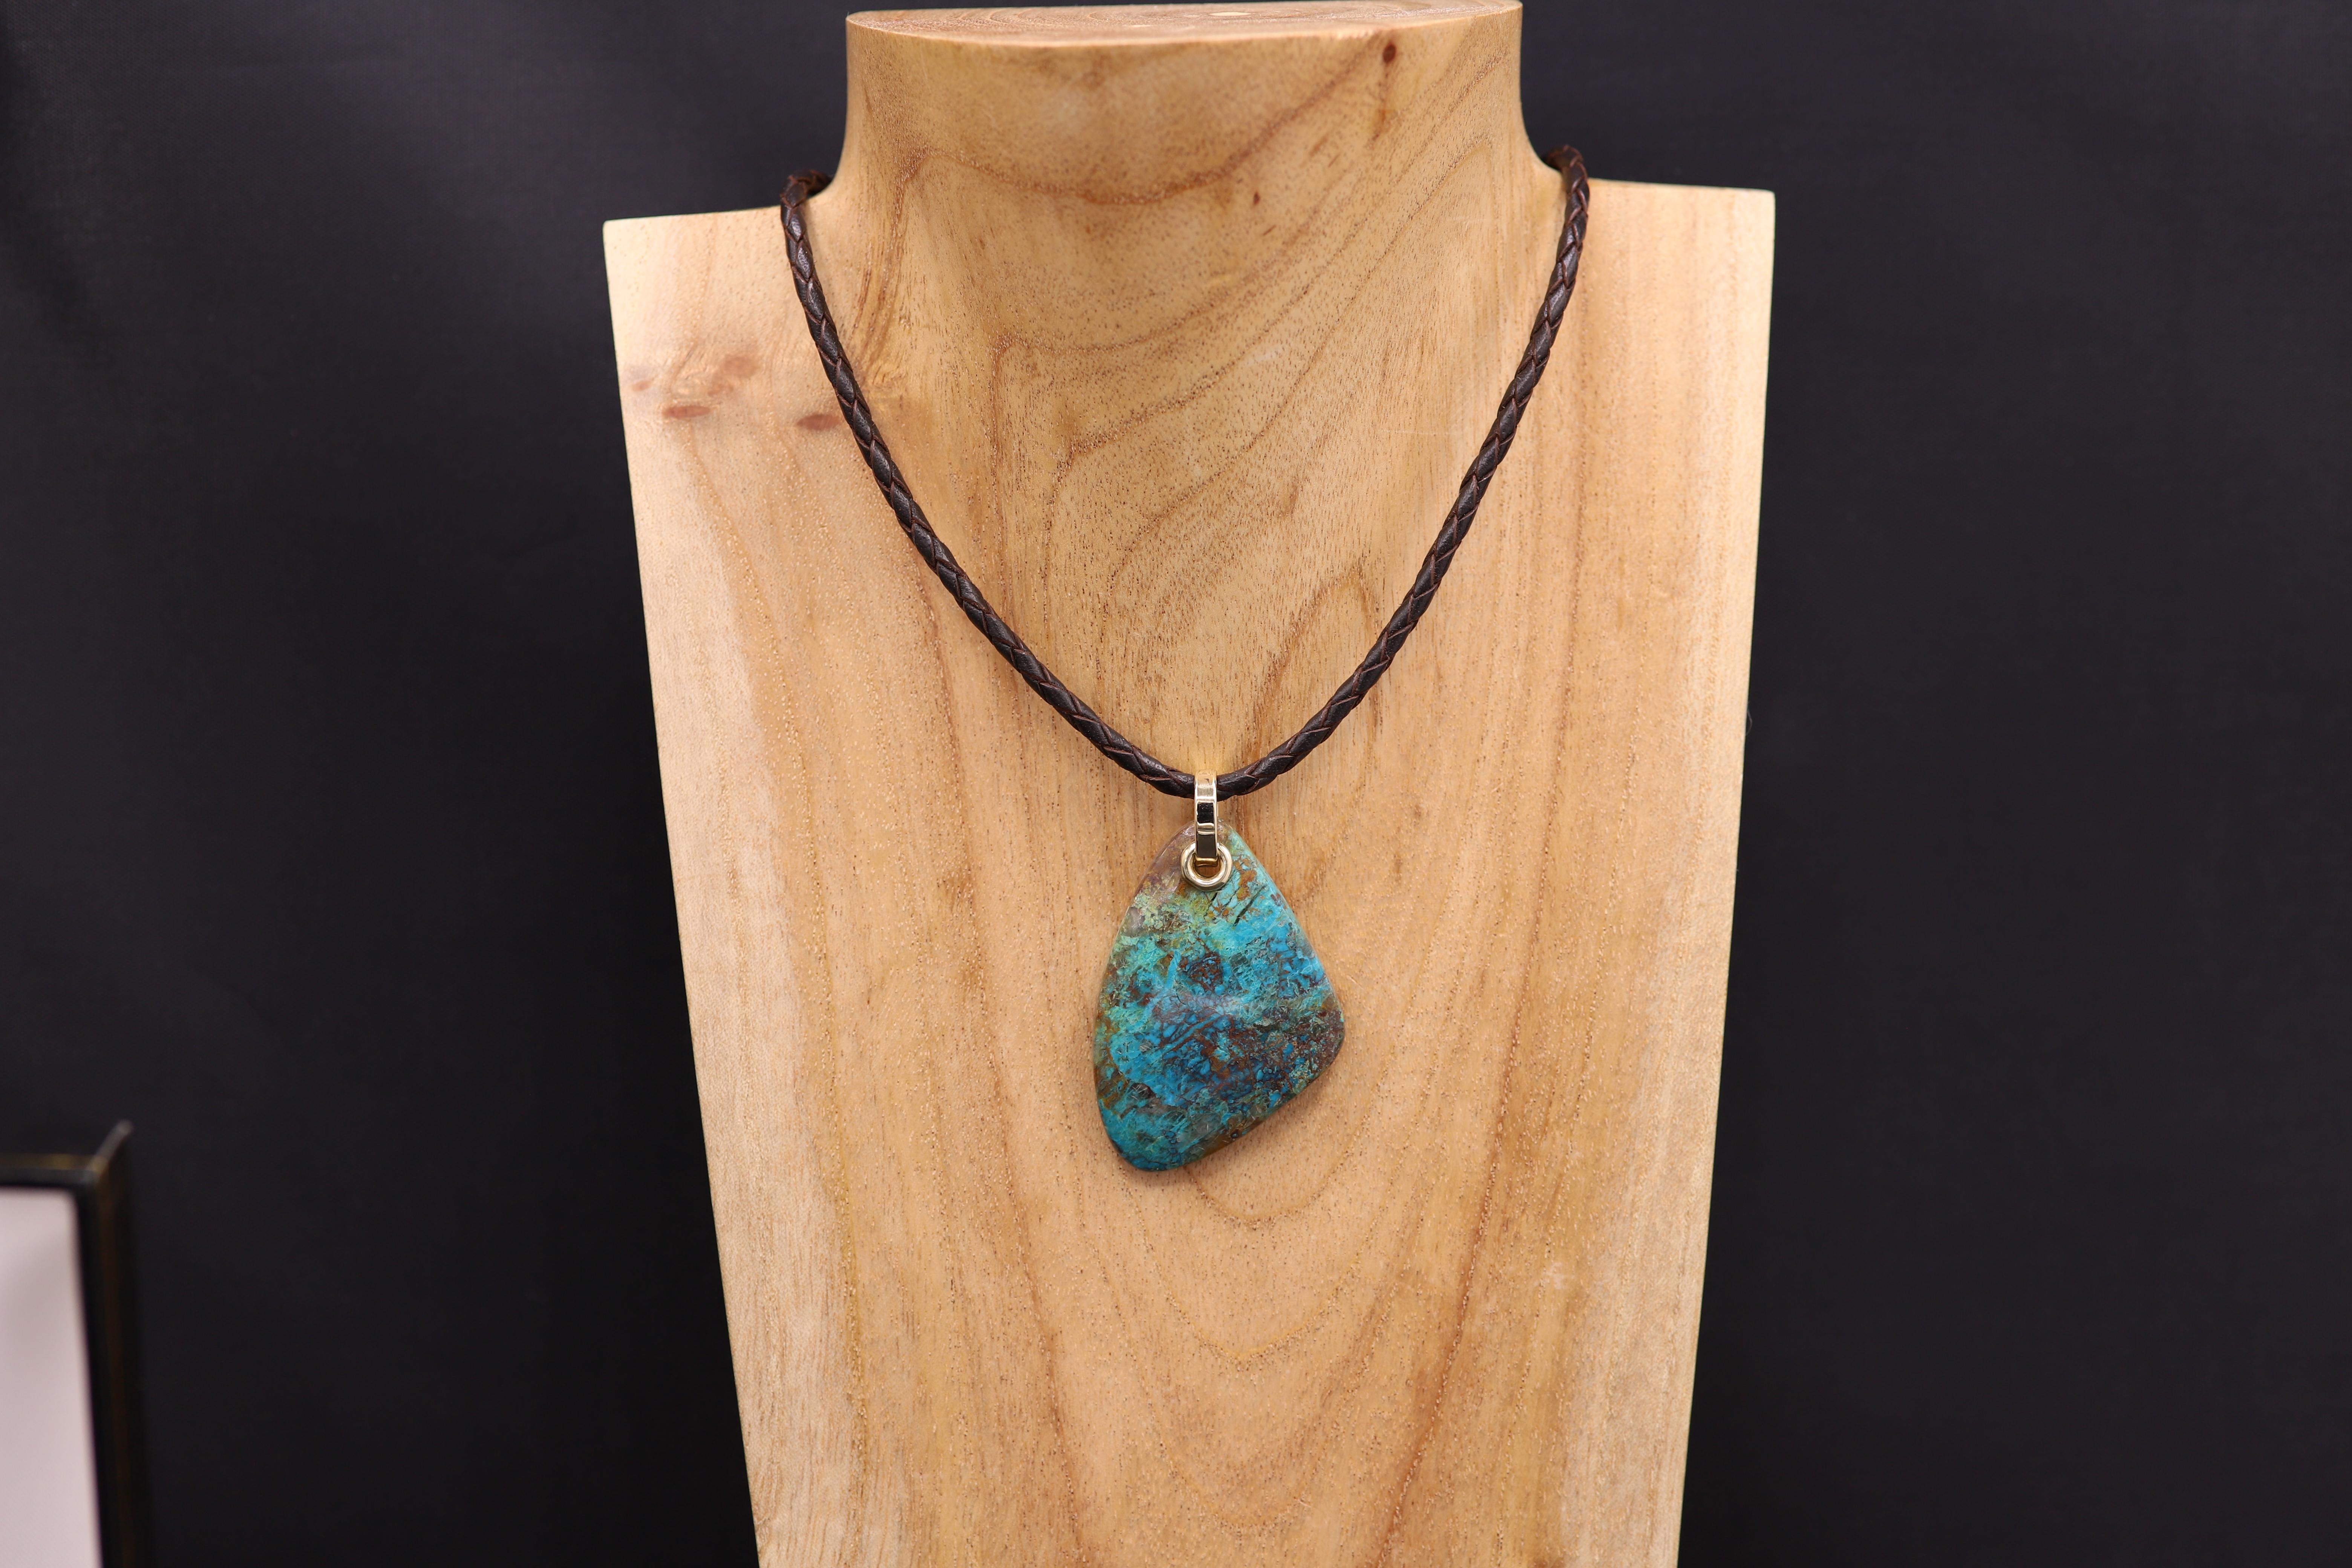 Brilliant One-of-a kind- natural Beautiful Chrysocolla stone Necklace.
all parts are 14k Yellow Gold and Italian-made leather cord.
Adjustable length 16.5' - 18.5' inch and all sizes in between, cord is dark brown.
Chryscolla stone is approx 1.75' x